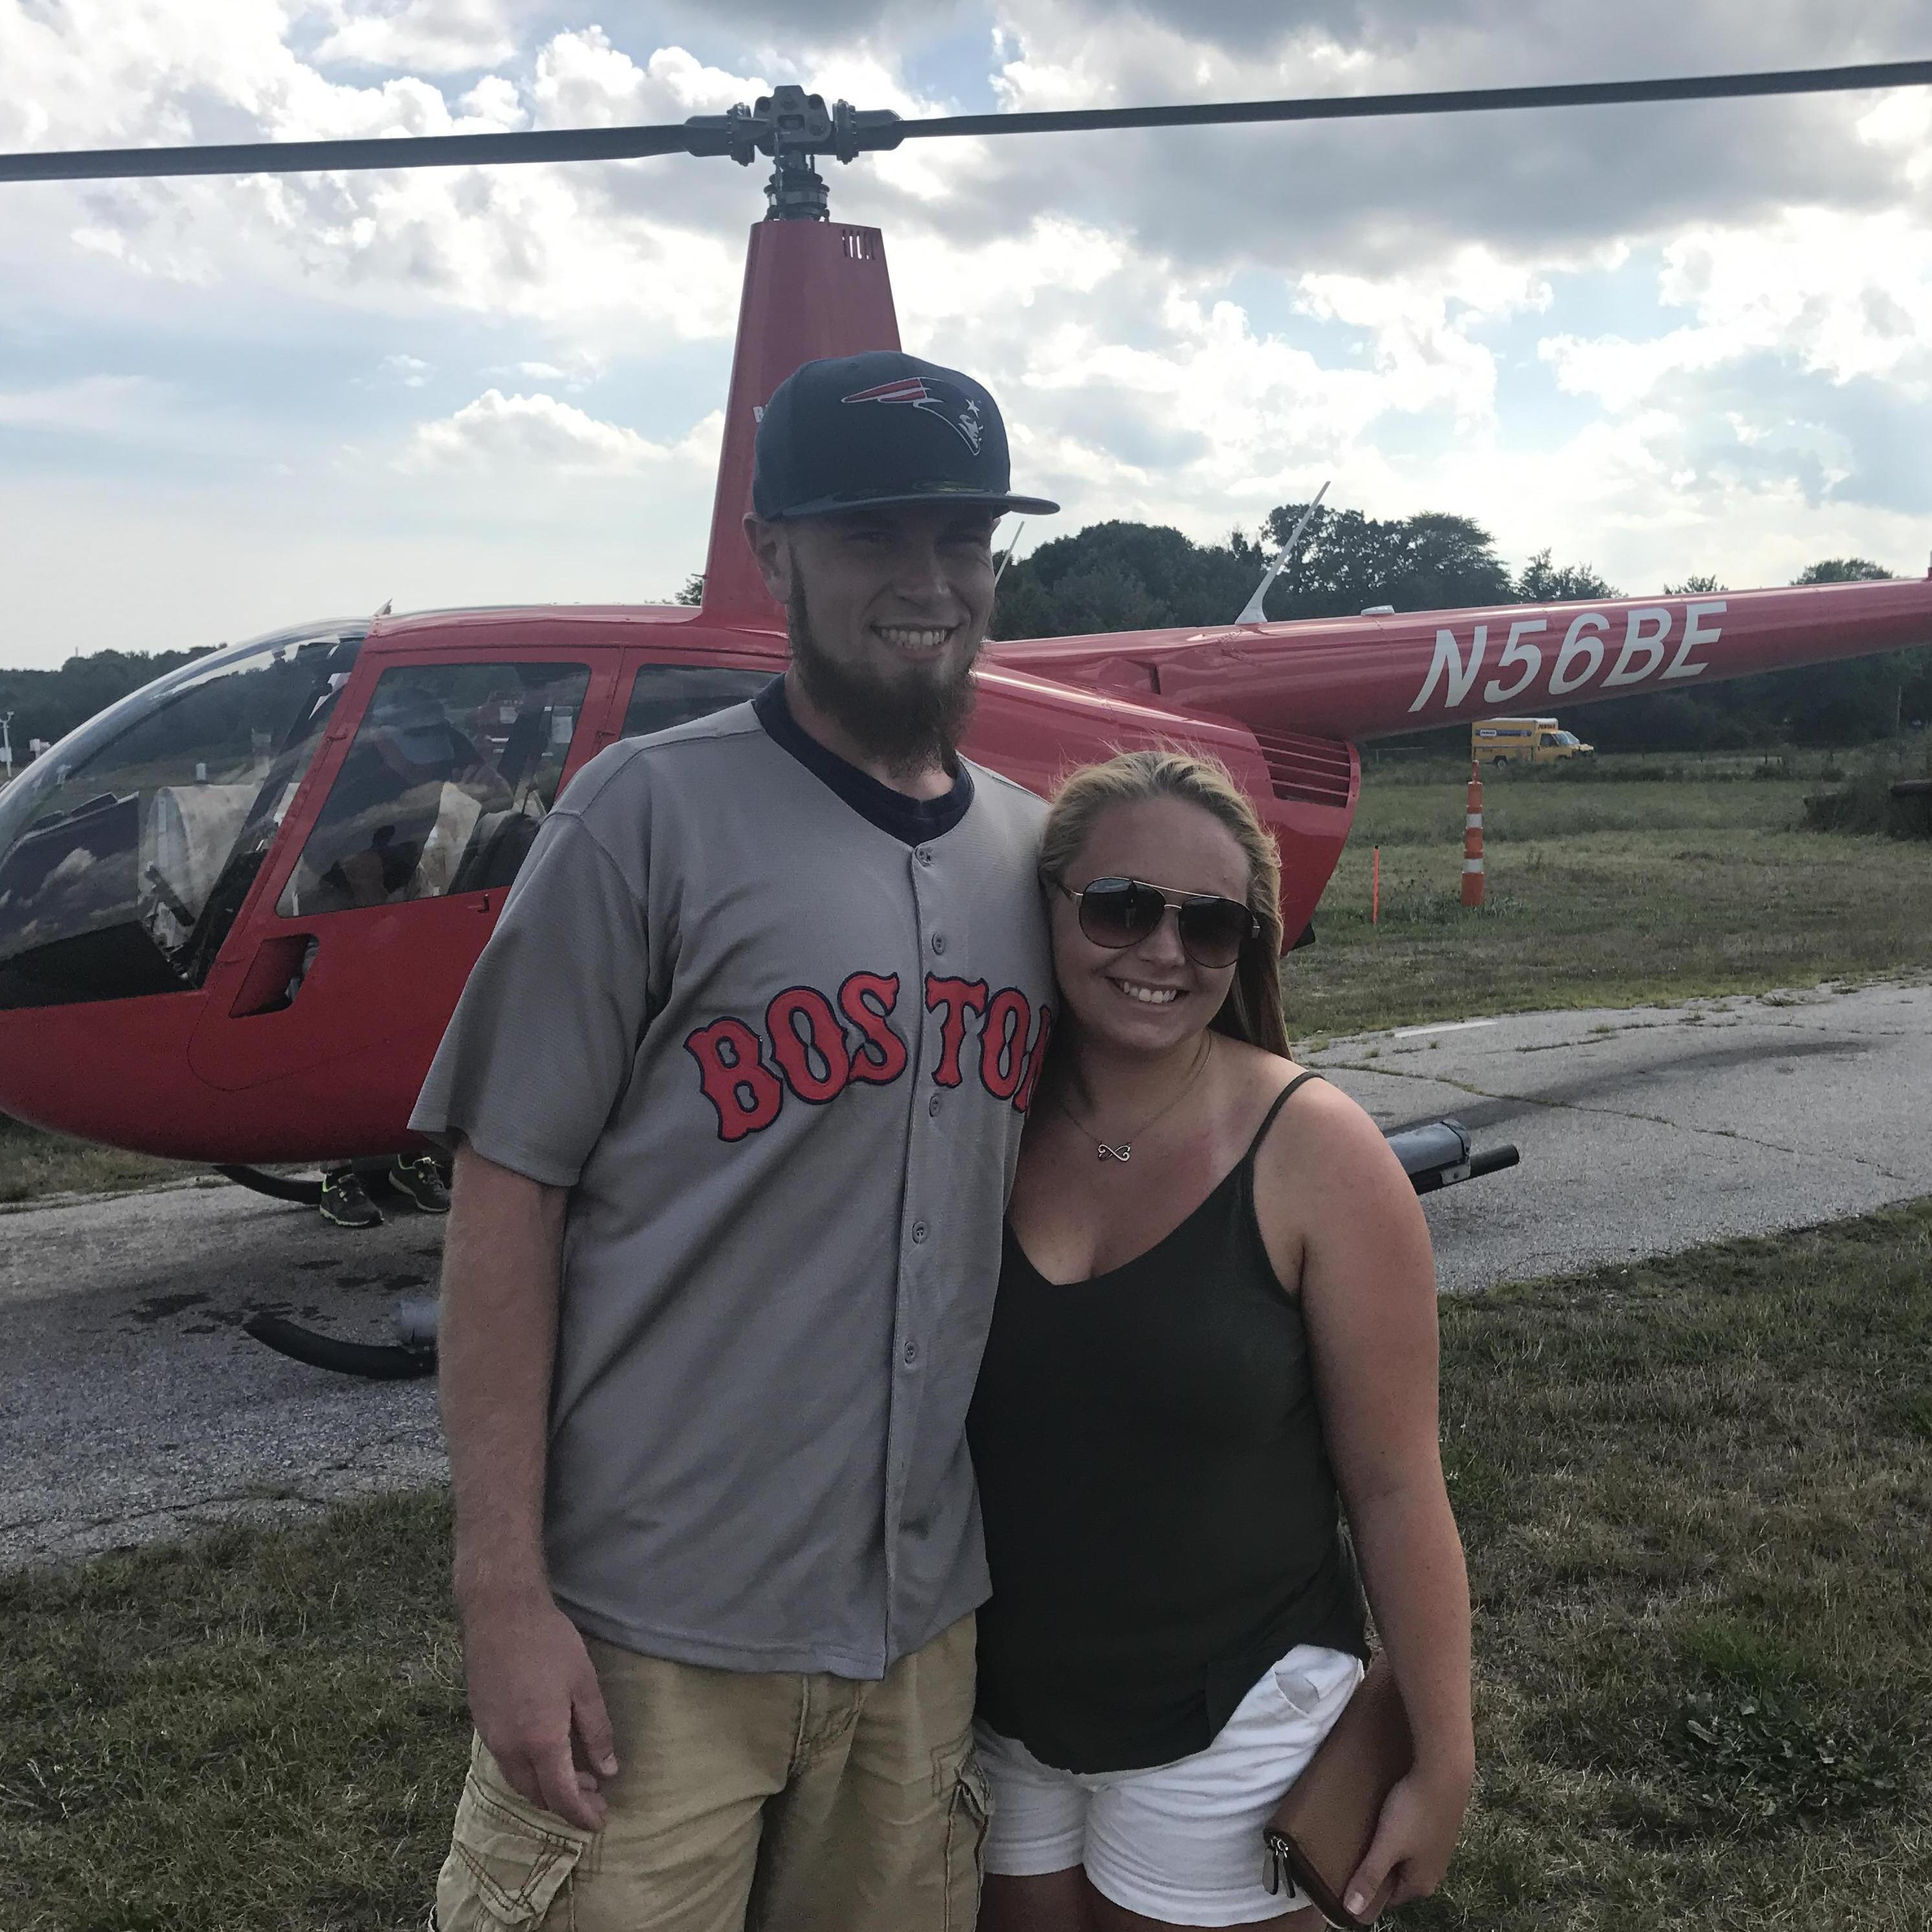 Our first vacation to Newport and our first time riding in a helicopter!